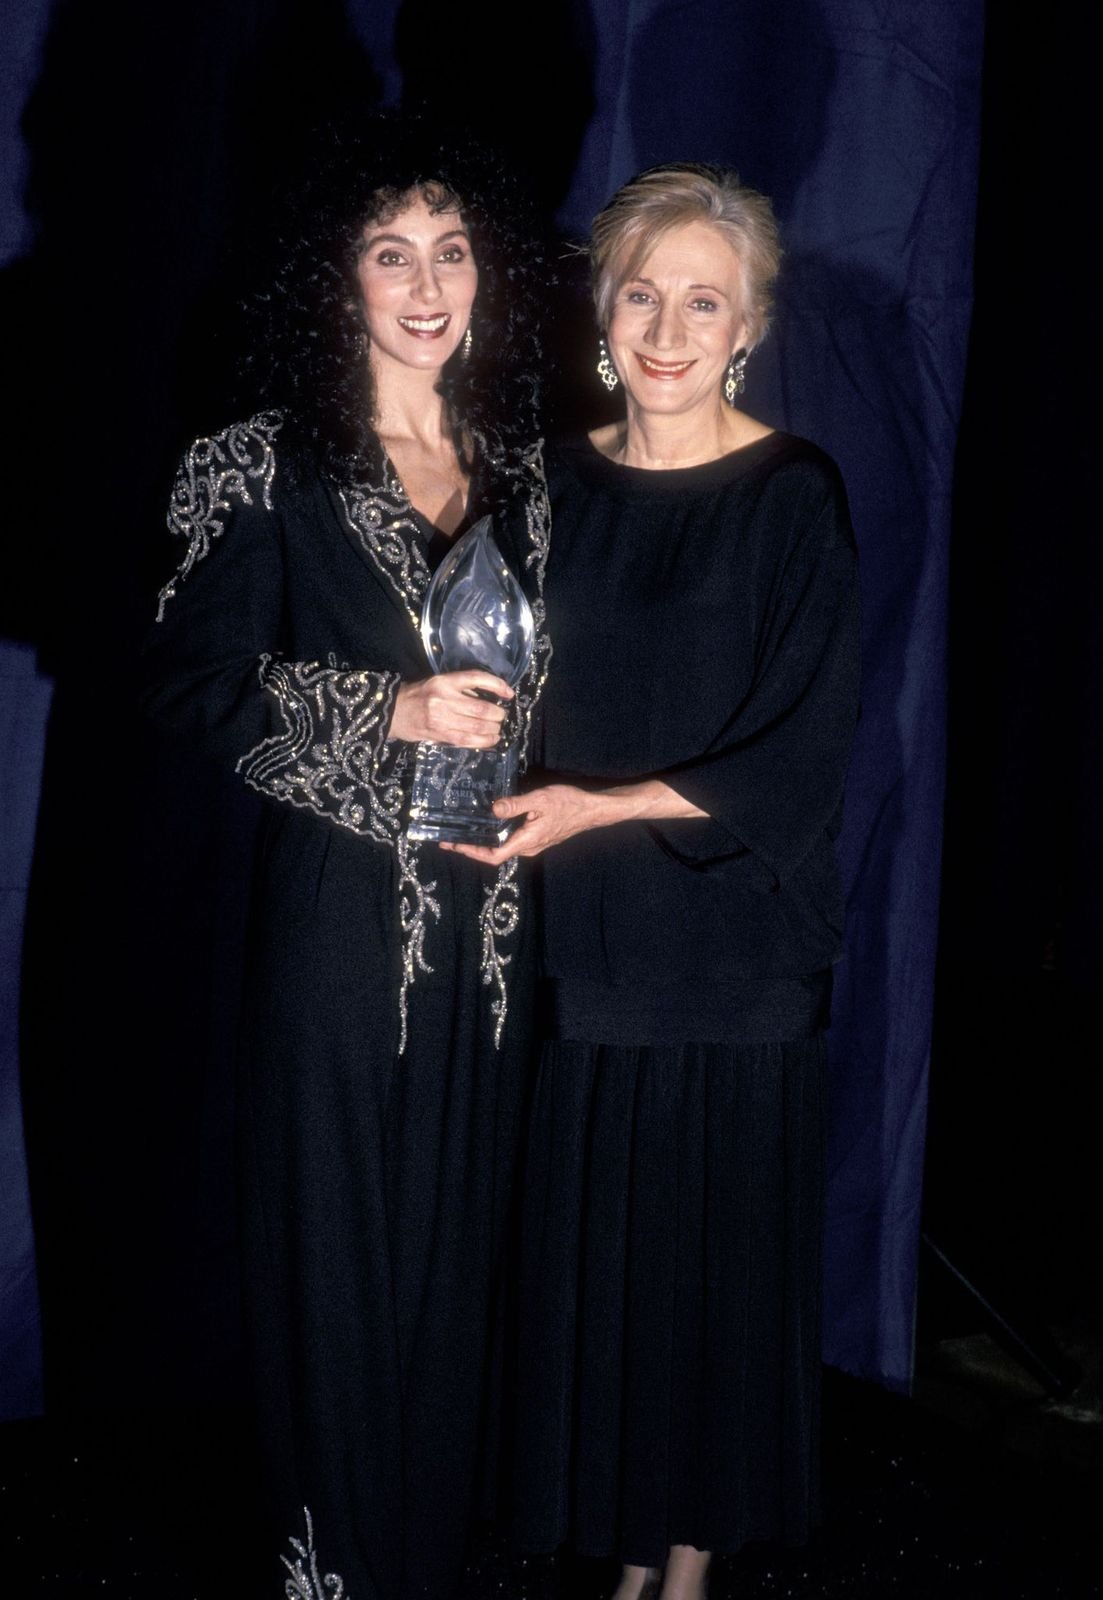  Cher and Olympia Dukakis at the 15th Annual People's Choice Awards on March 12, 1989. | Getty Images